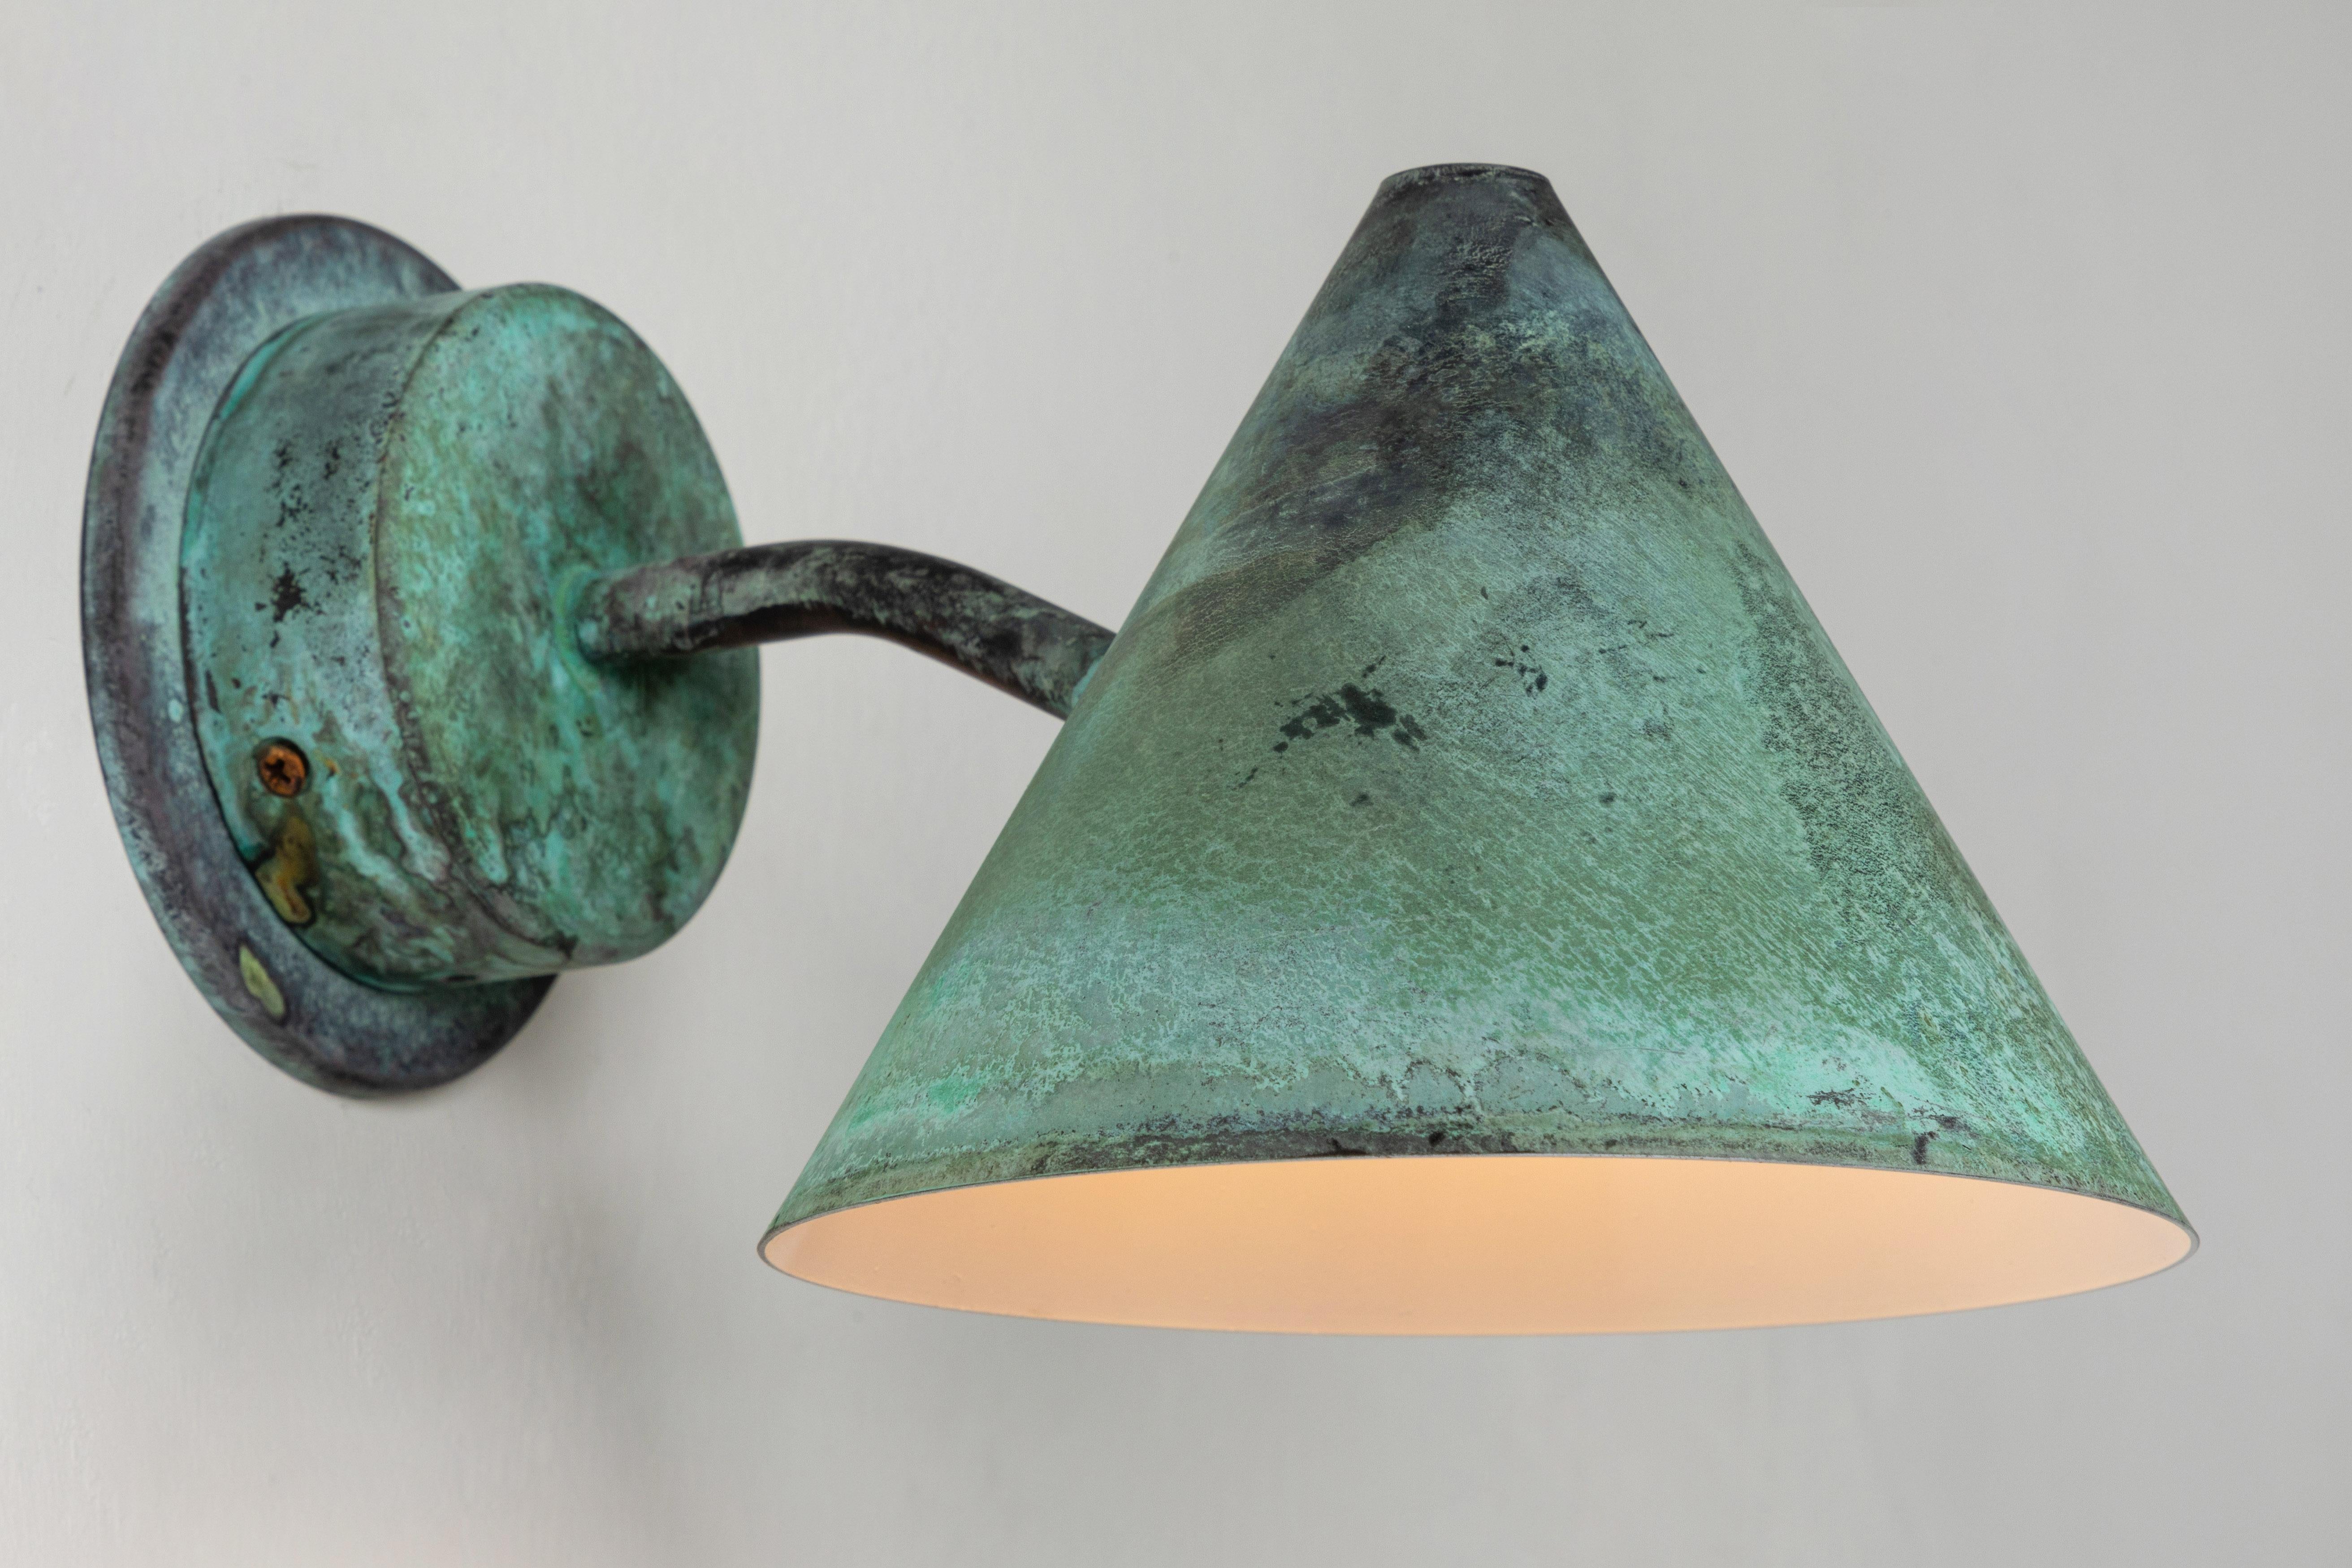 Hans-Agne Jakobsson 'Mini-Tratten' patinated outdoor sconces. An exclusive made for U.S. and UL listed authorized re-edition of the classic Swedish design executed in rich verdigris patinated metal with white painted interior. An incredibly refined